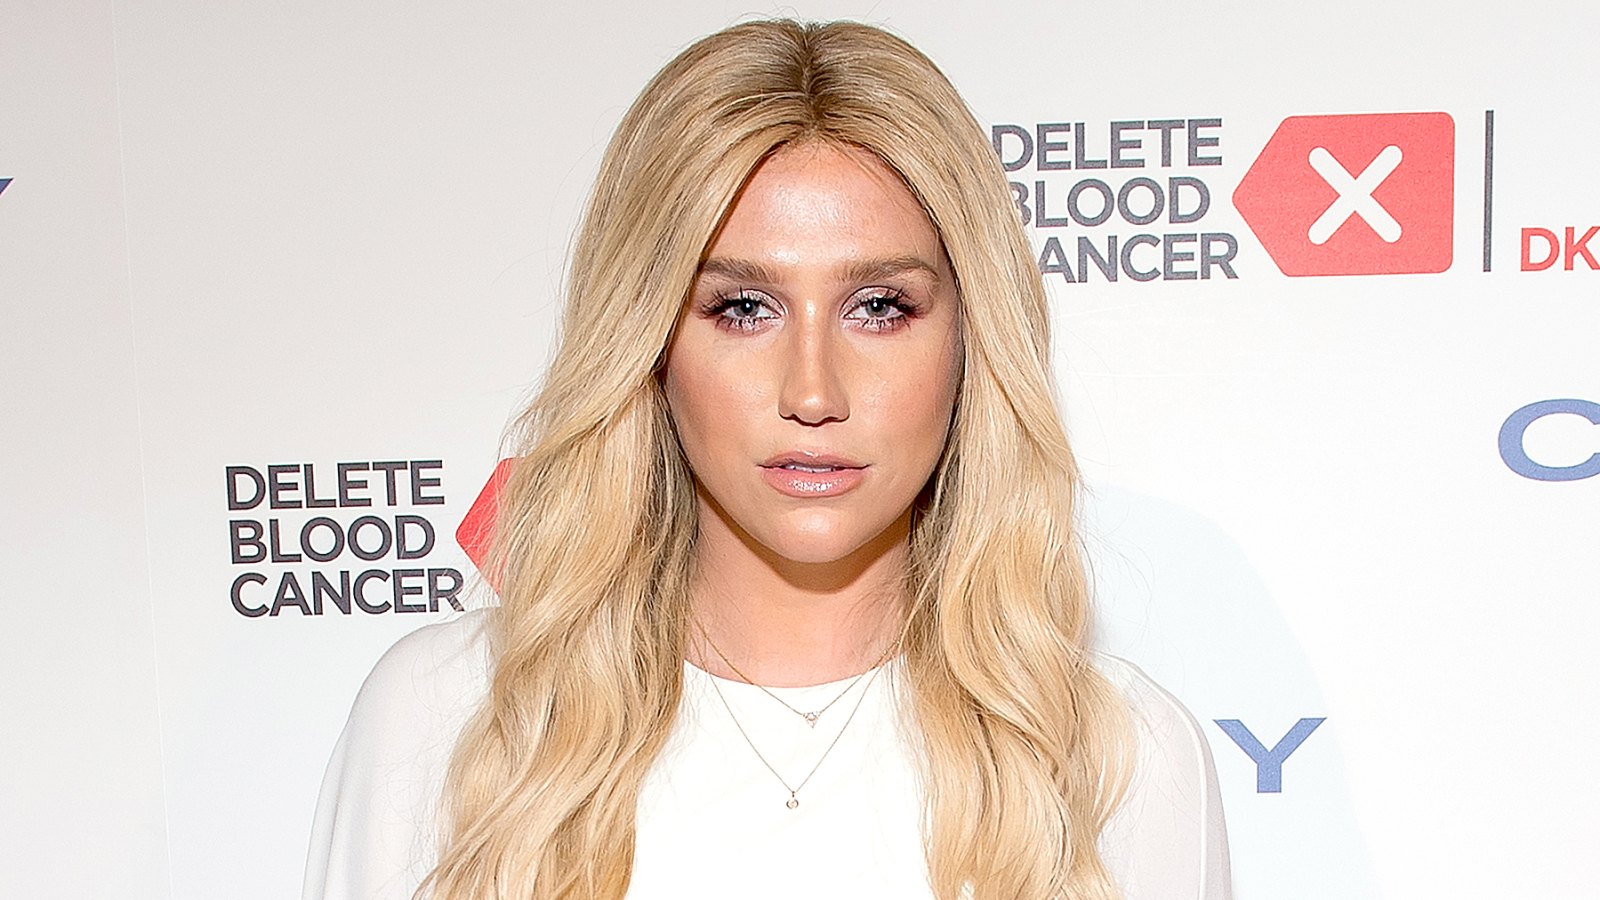 Kesha attends the 9th Annual Delete Blood Cancer Gala at Cipriani, Wall Street on April 16, 2015 in New York City.